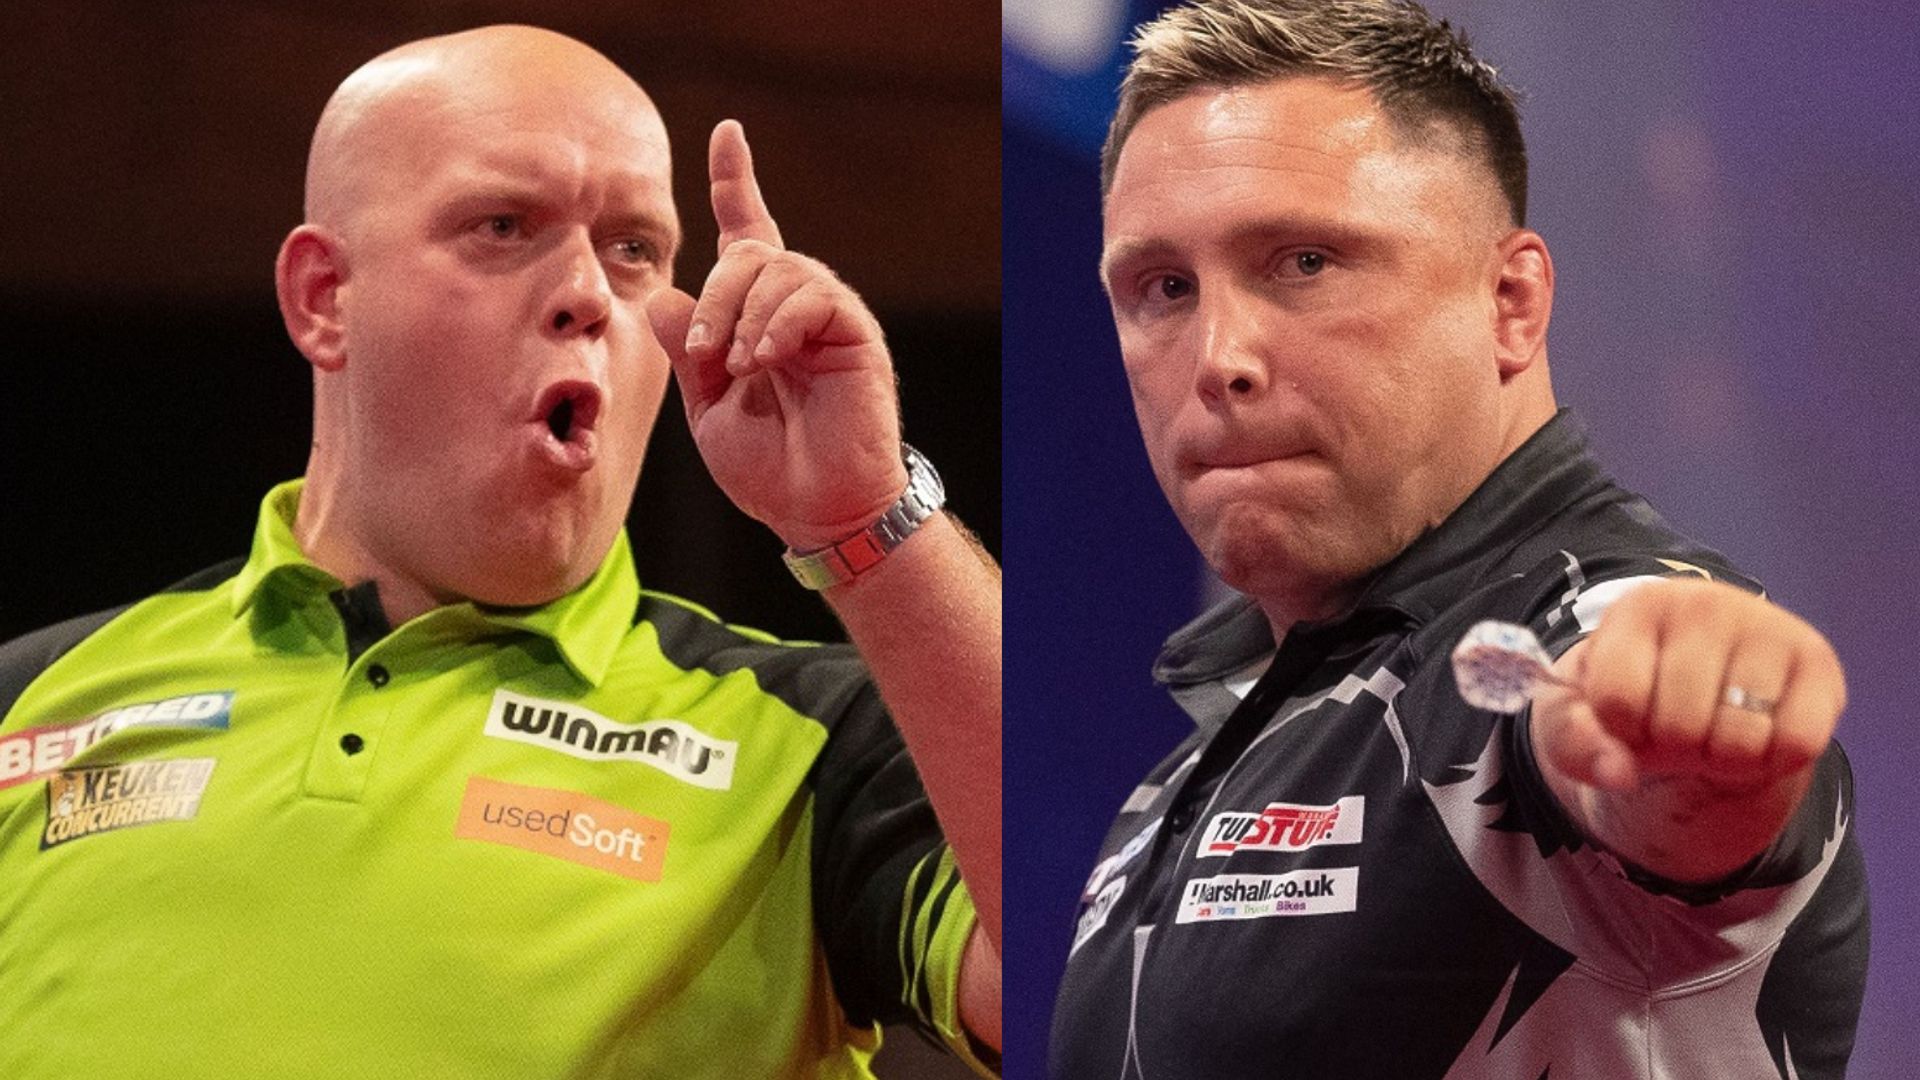 Premier League Darts LIVE: Price takes on MVG in Cardiff semi-finals